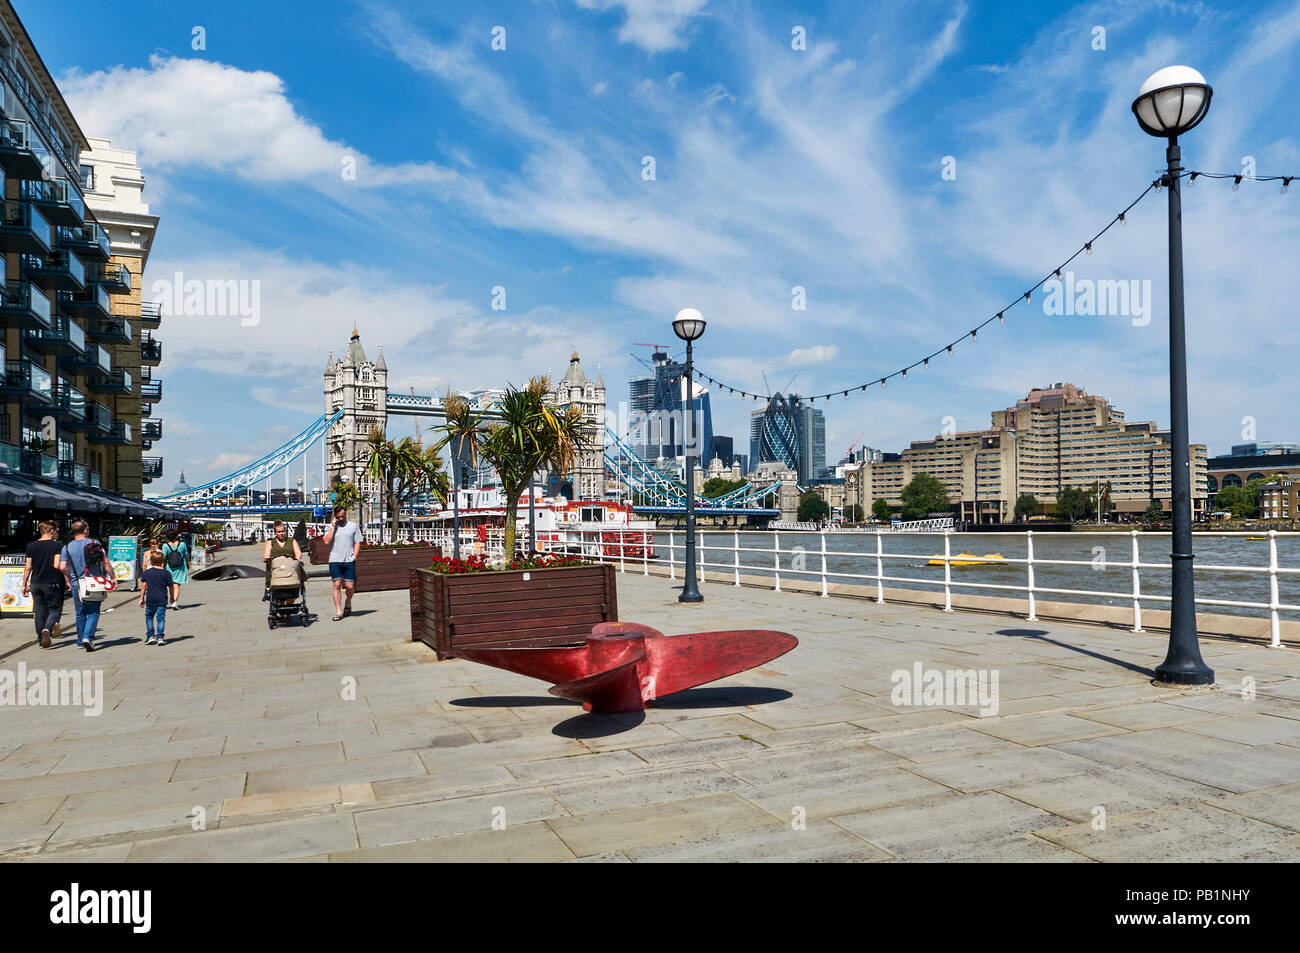 Pedestrianised area by the River Thames, behind Butler's Wharf on the South Bank, looking west towards Tower Bridge, London UK Stock Photo